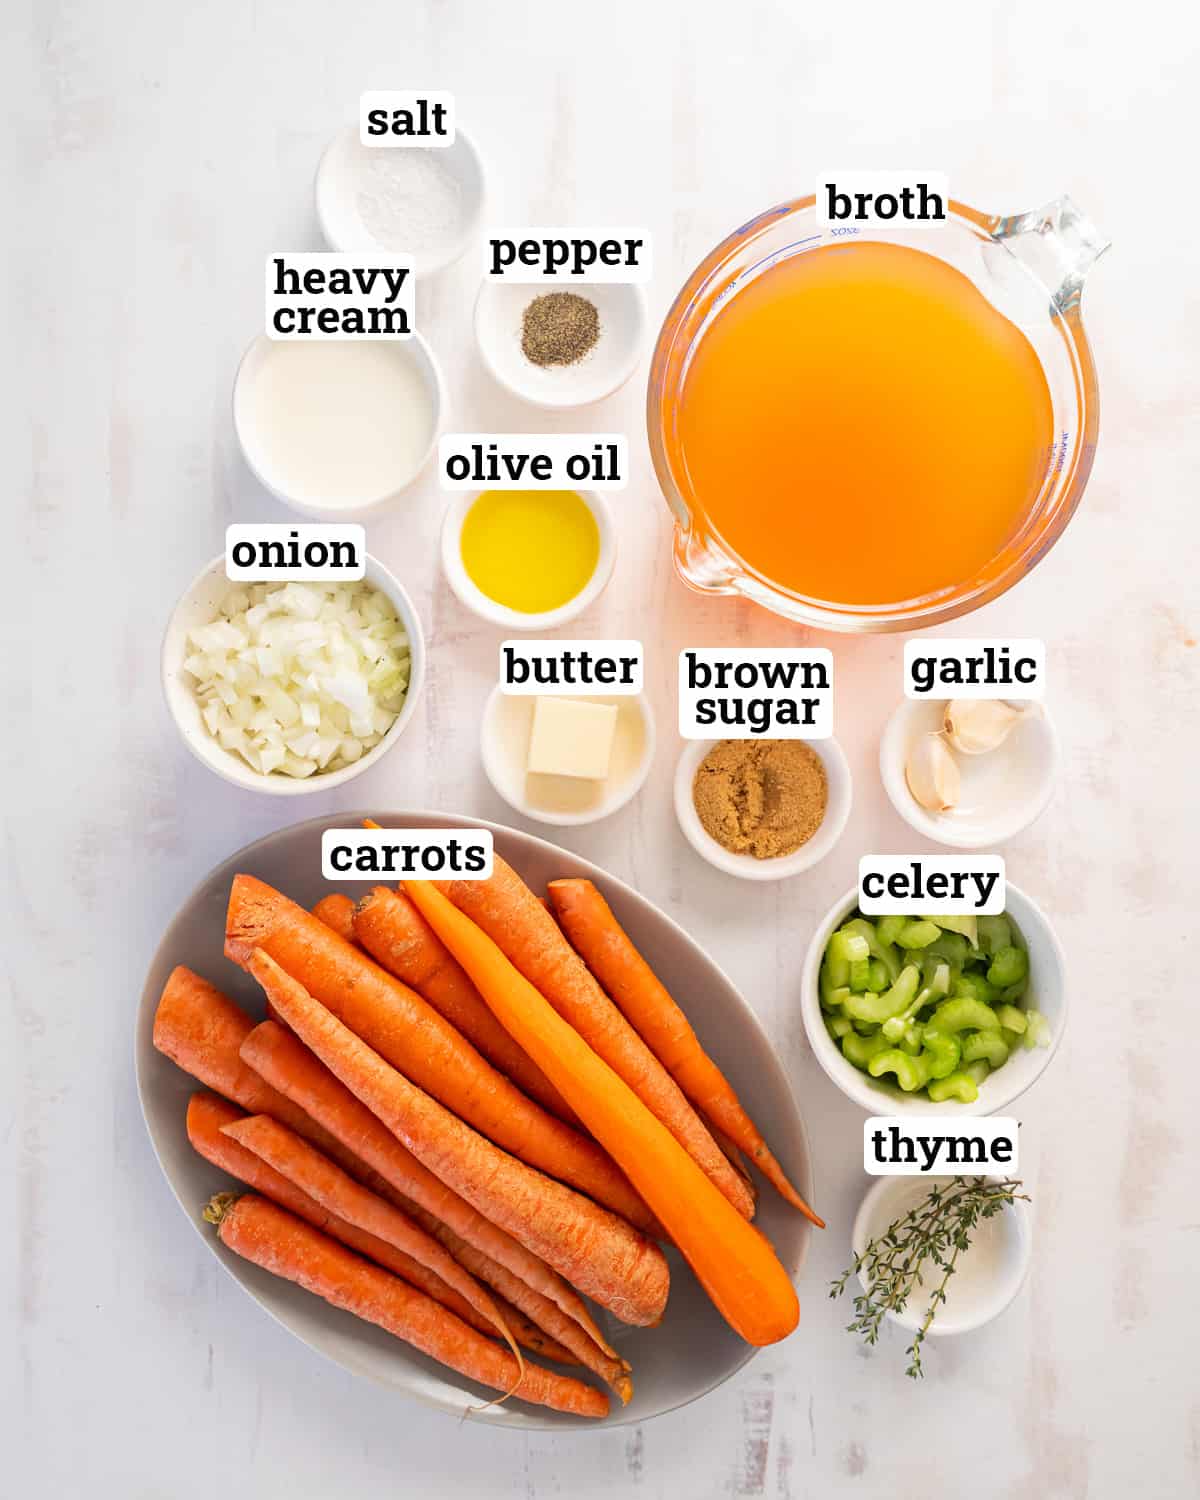 The ingredients for Carrot Soup with text.